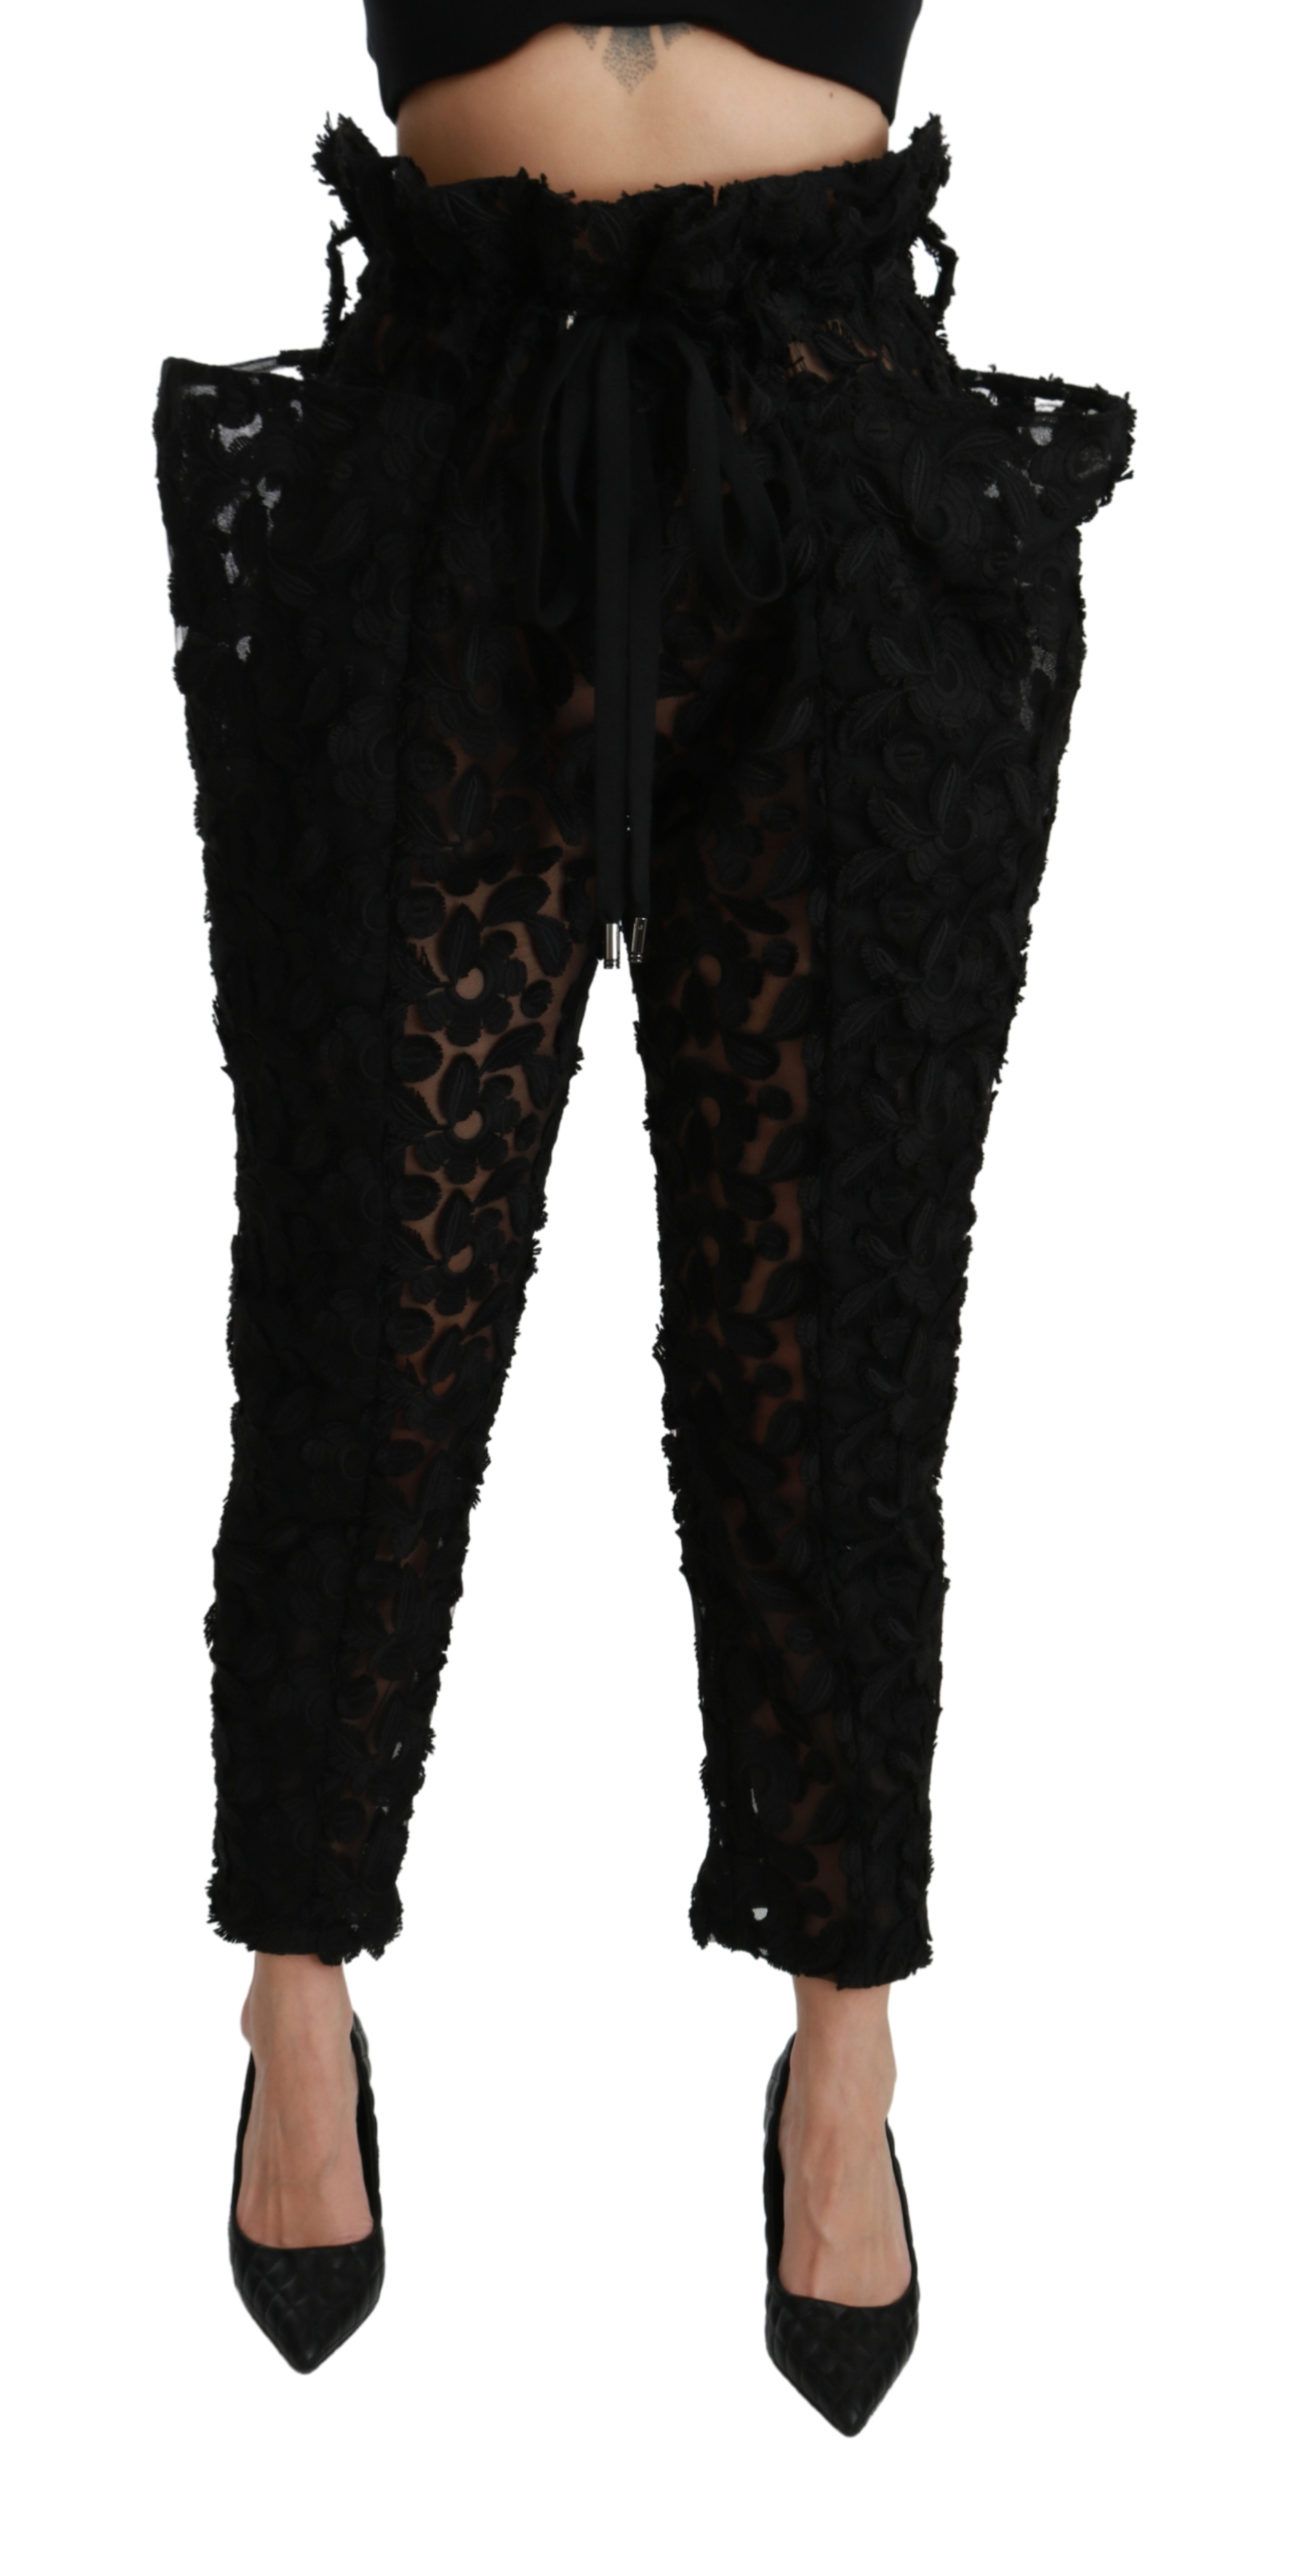 Black Dolce & Gabbana Black Floral Lace Tapered High Waist Pants